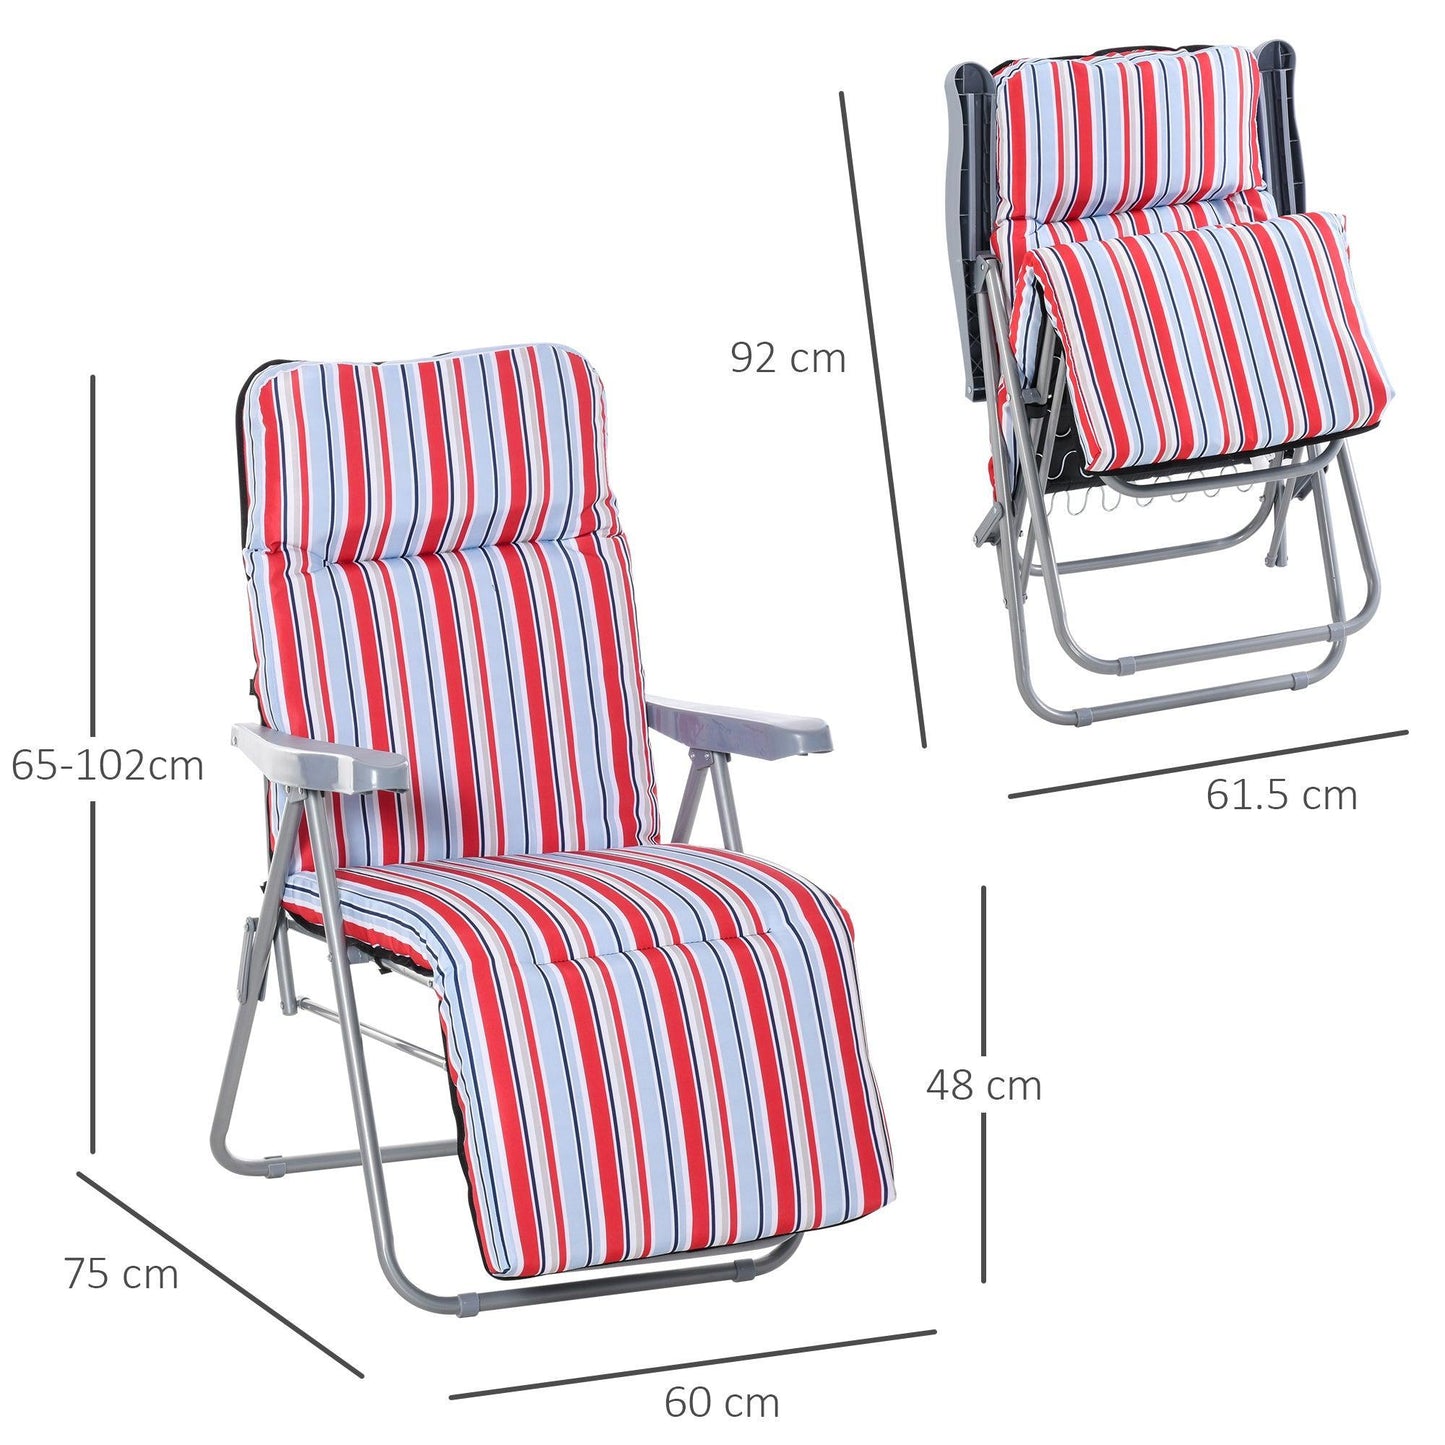 Outsunny Outdoor Reclining Sun Lounger Set - Red & White - ALL4U RETAILER LTD